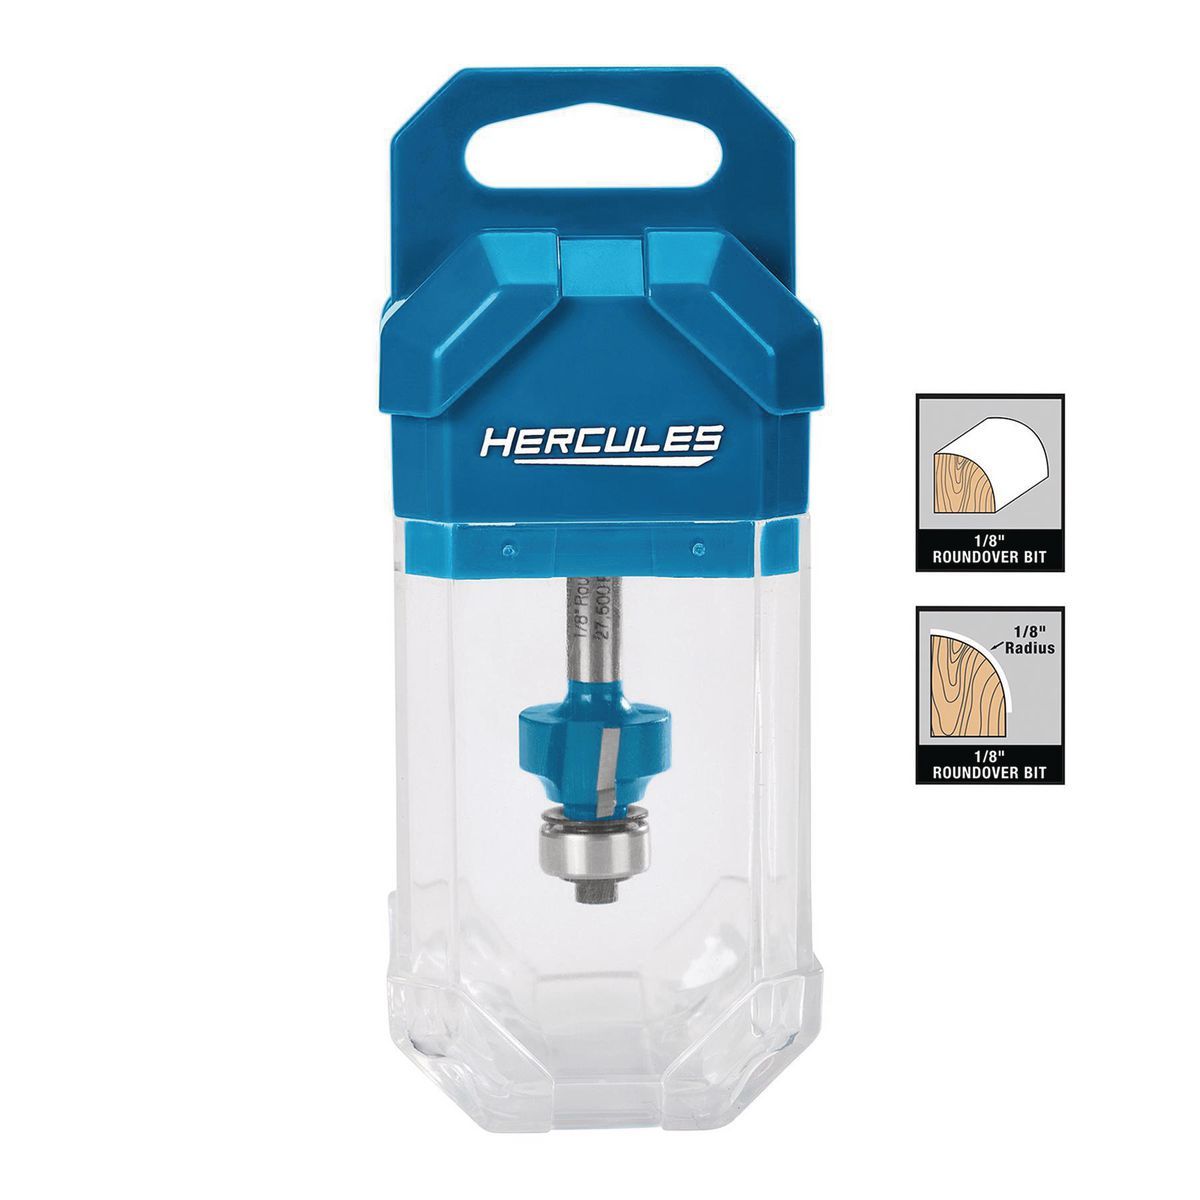 HERCULES 1/8 in. Roundover/Beading Router Bit with 1/4 in. Shank